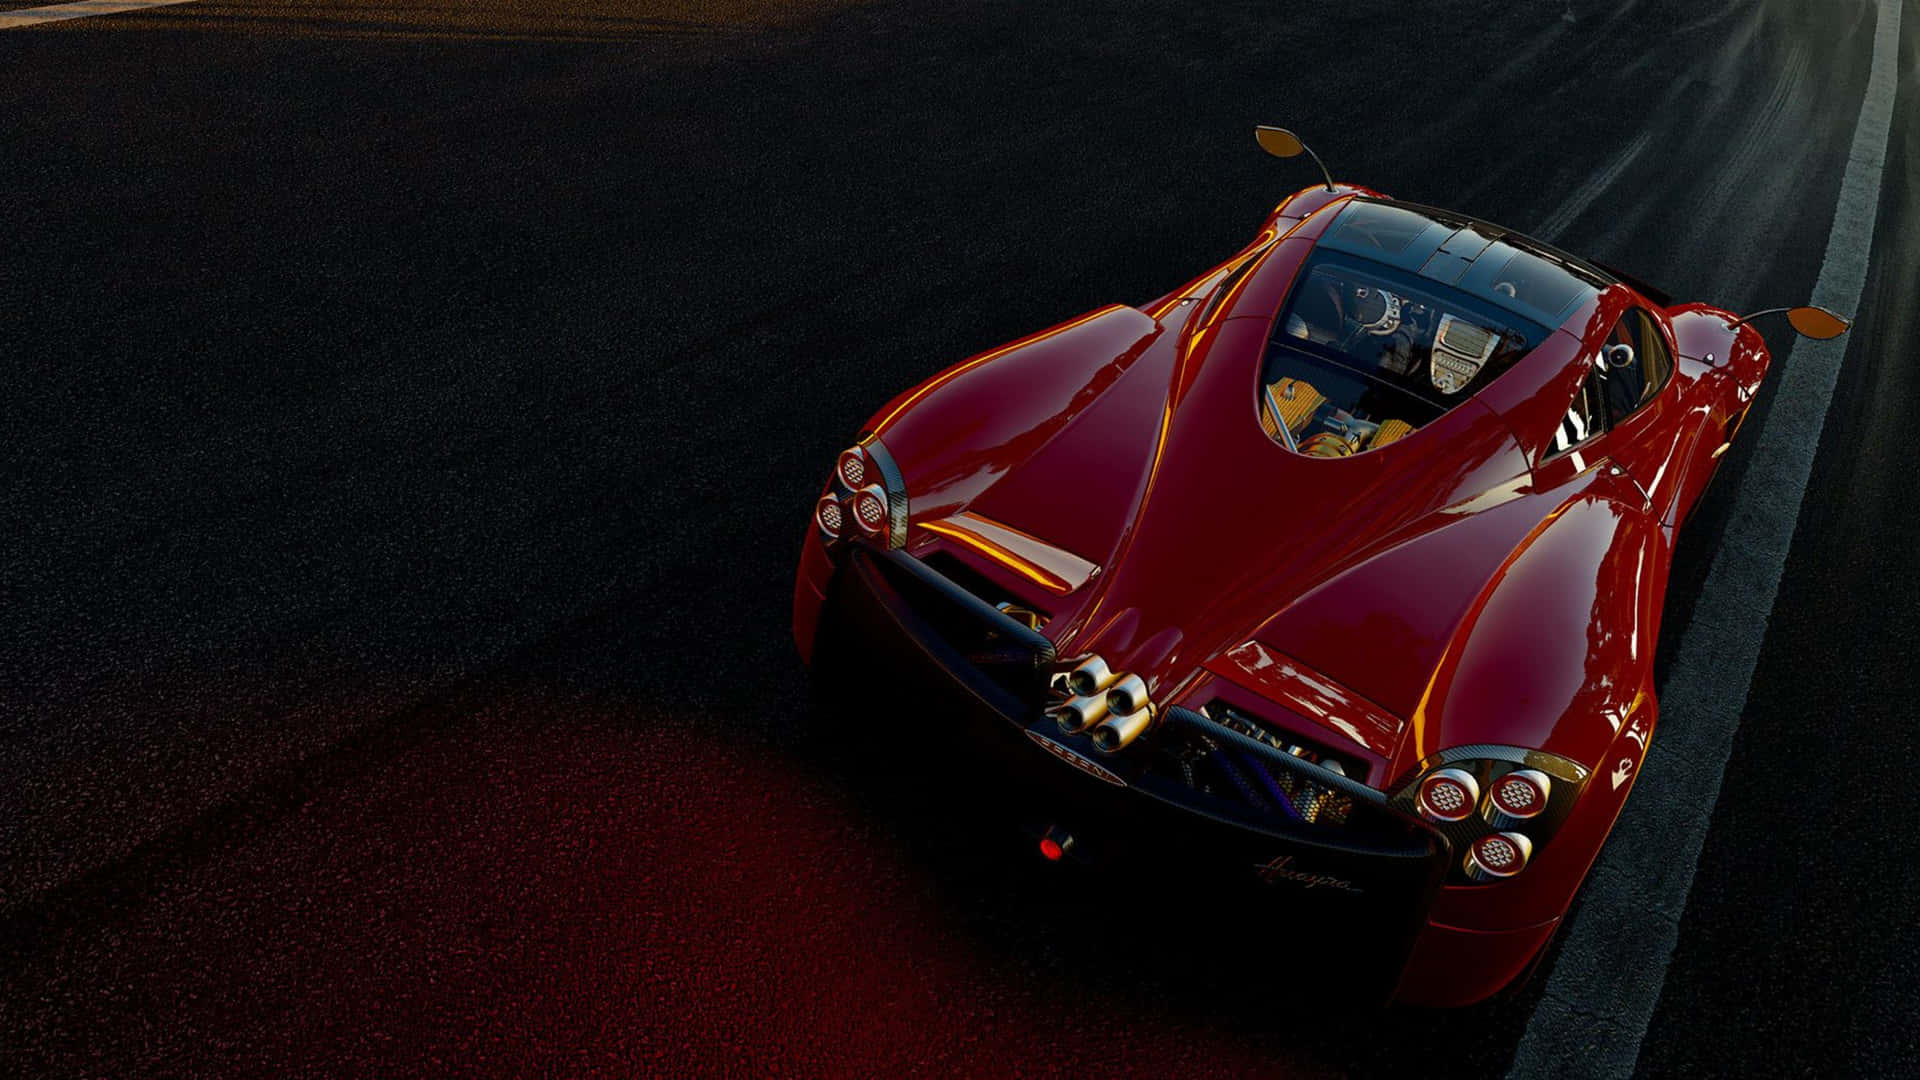 4k Project Cars Glossy Red Pagani Huayra Background